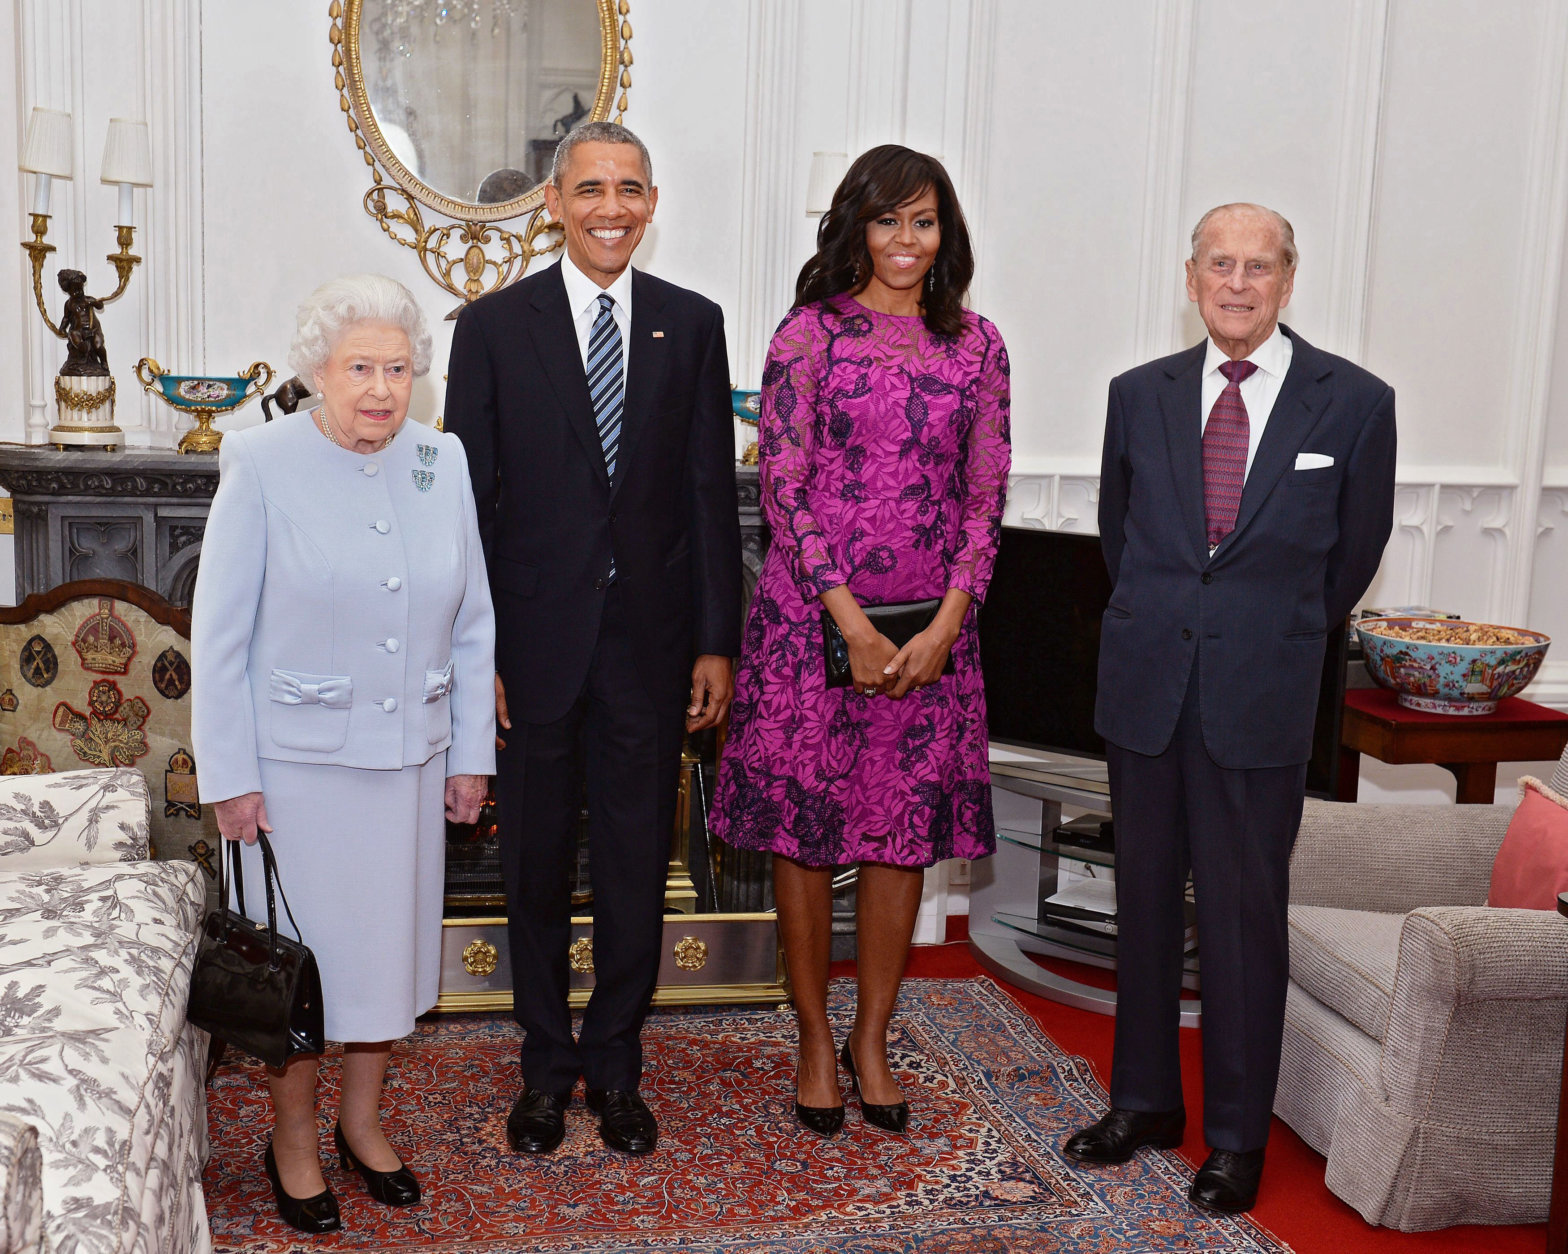 President Barack Obama, center left, and his wife first lady Michelle Obama, center right, pose with Britain's Queen Elizabeth II, left, and Prince Phillip in the Oak room at Windsor Castle ahead of a private lunch hosted by the Queen, Friday, April 22, 2016 (John Stillwell/Pool)